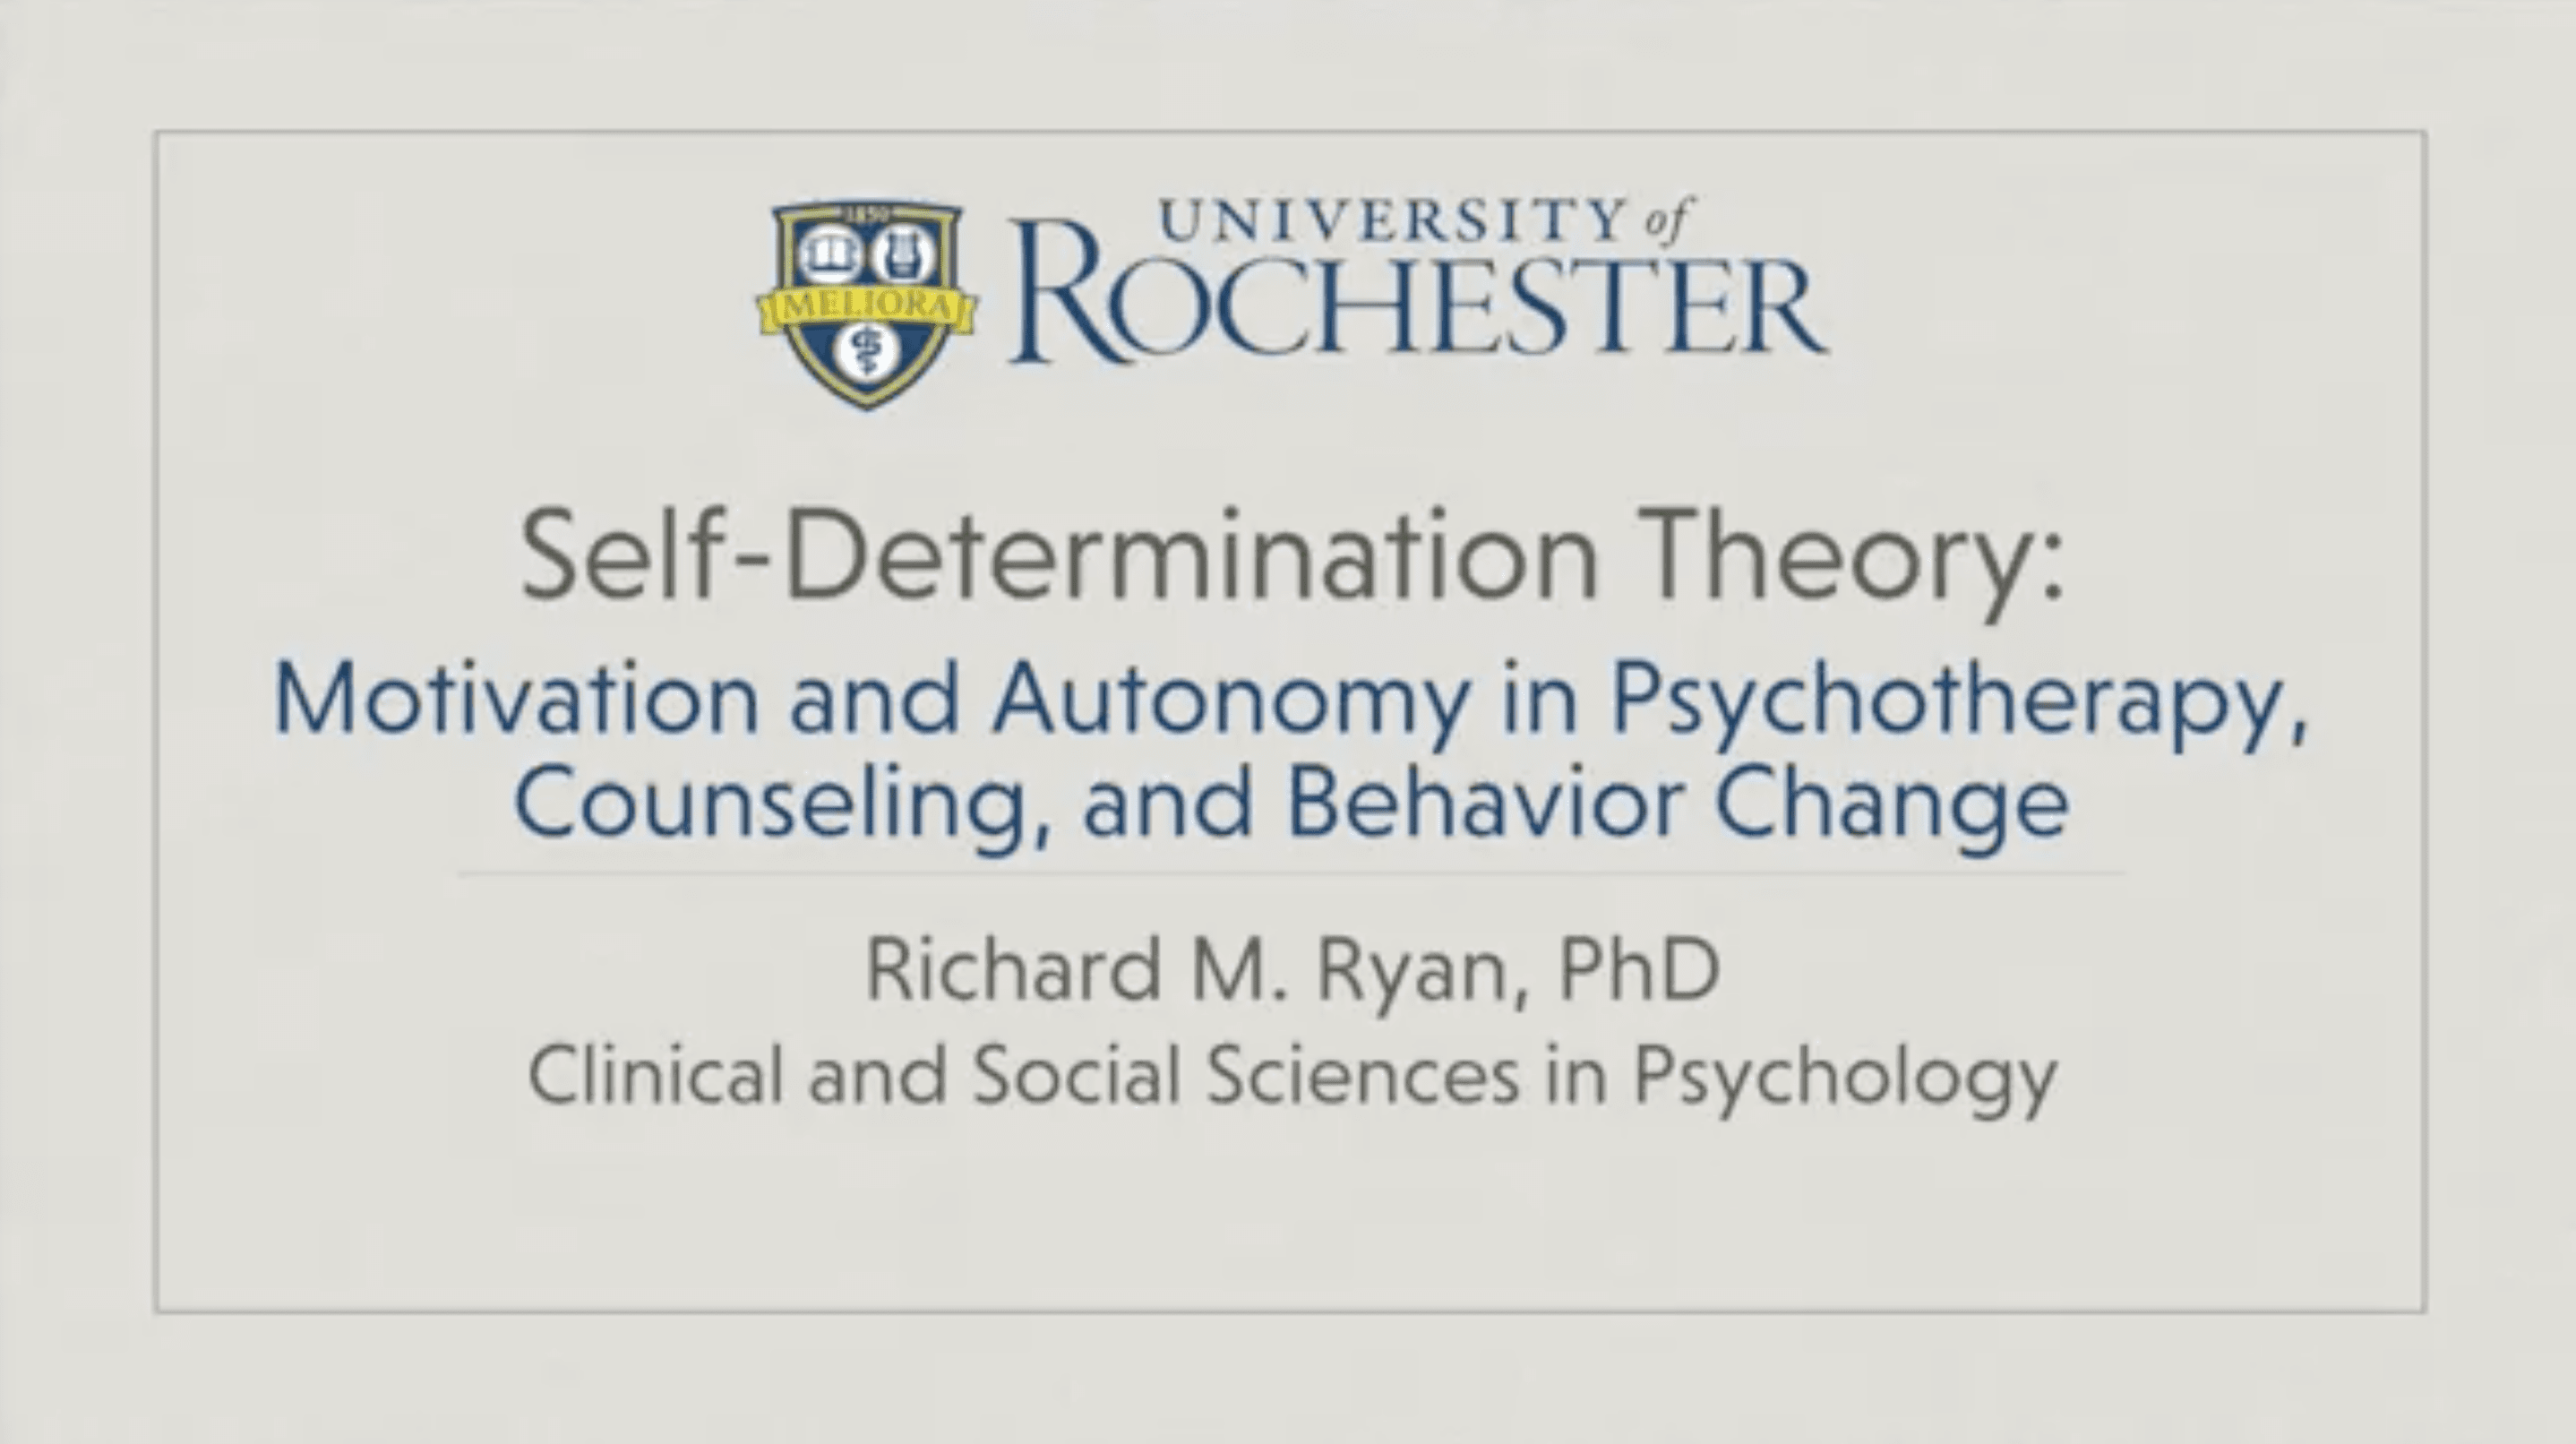 Psychotherapy Counseling and Behavior Change Coursera video with Richard M Ryan